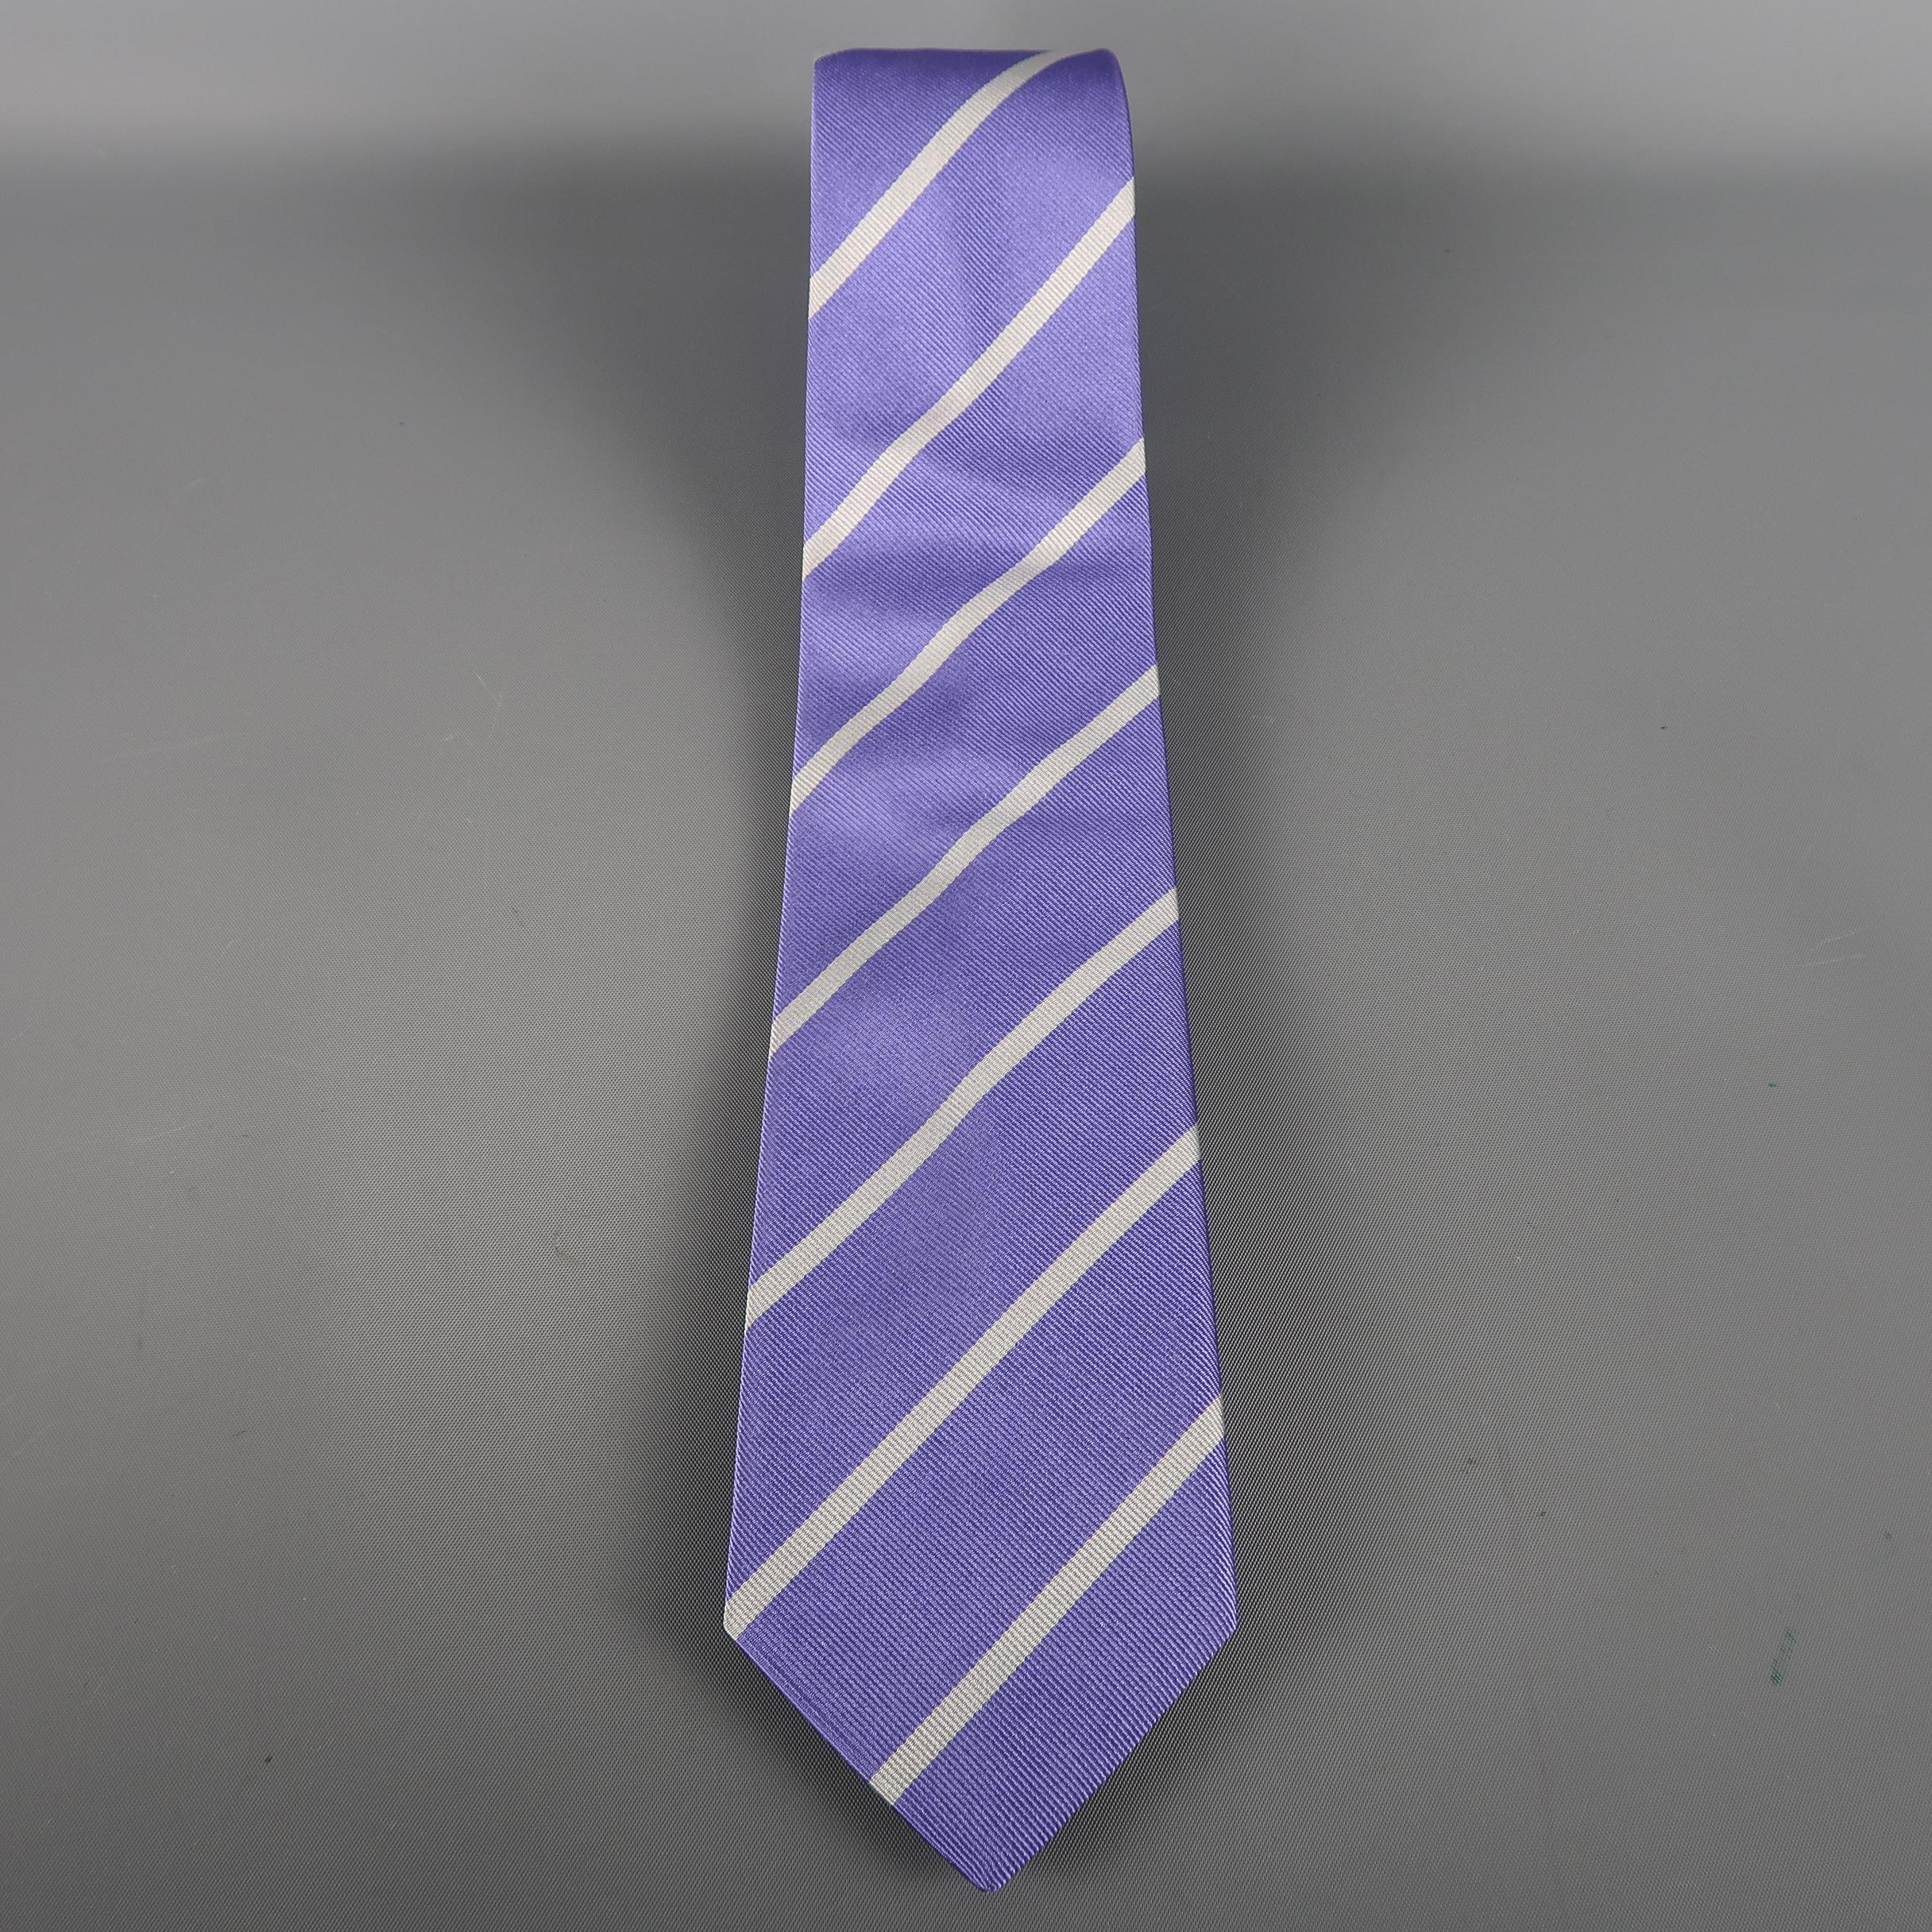 RALPH LAUREN  PURPLE LABEL tie come in purple silk with diagonal silver stripes and a brass ring buckle. Made in Italy.
 
Excellent Pre-Owned Condition.
 
Width: 3 in.